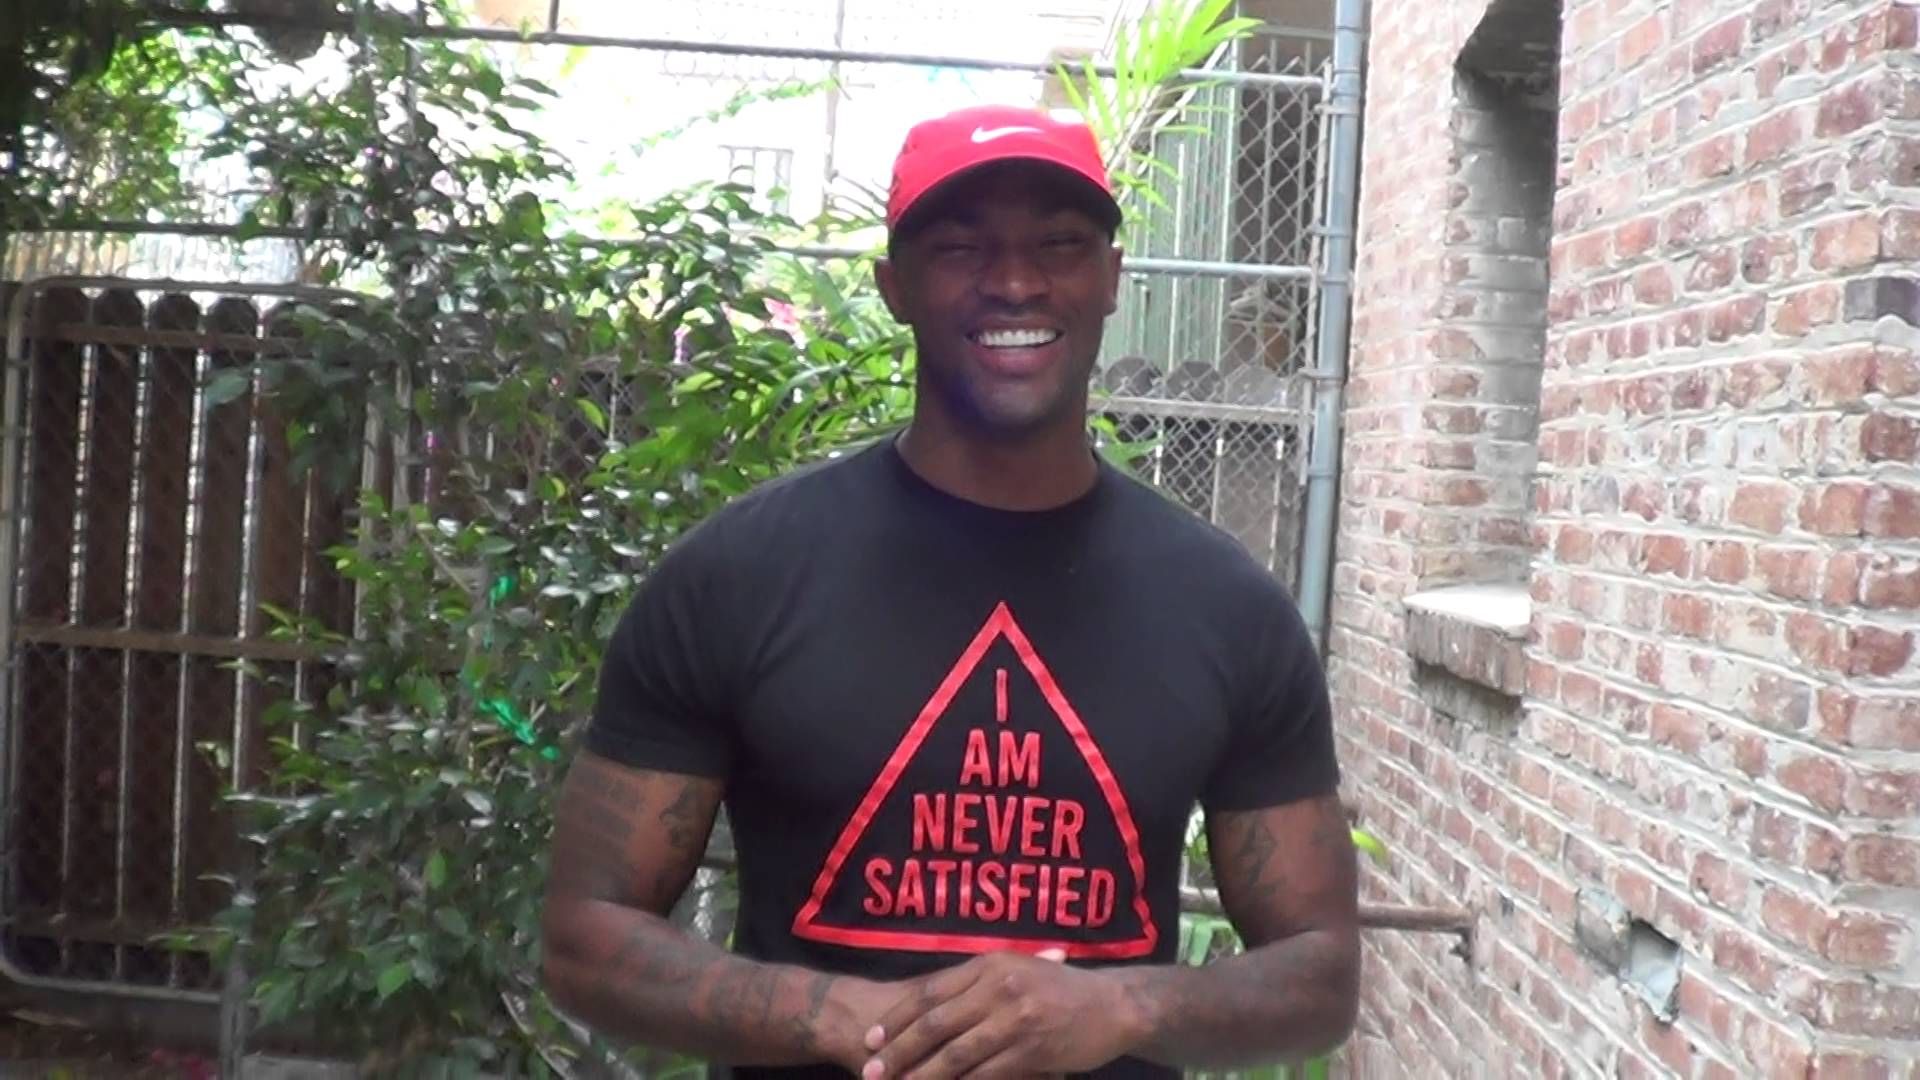 Pictures of Keith Carlos